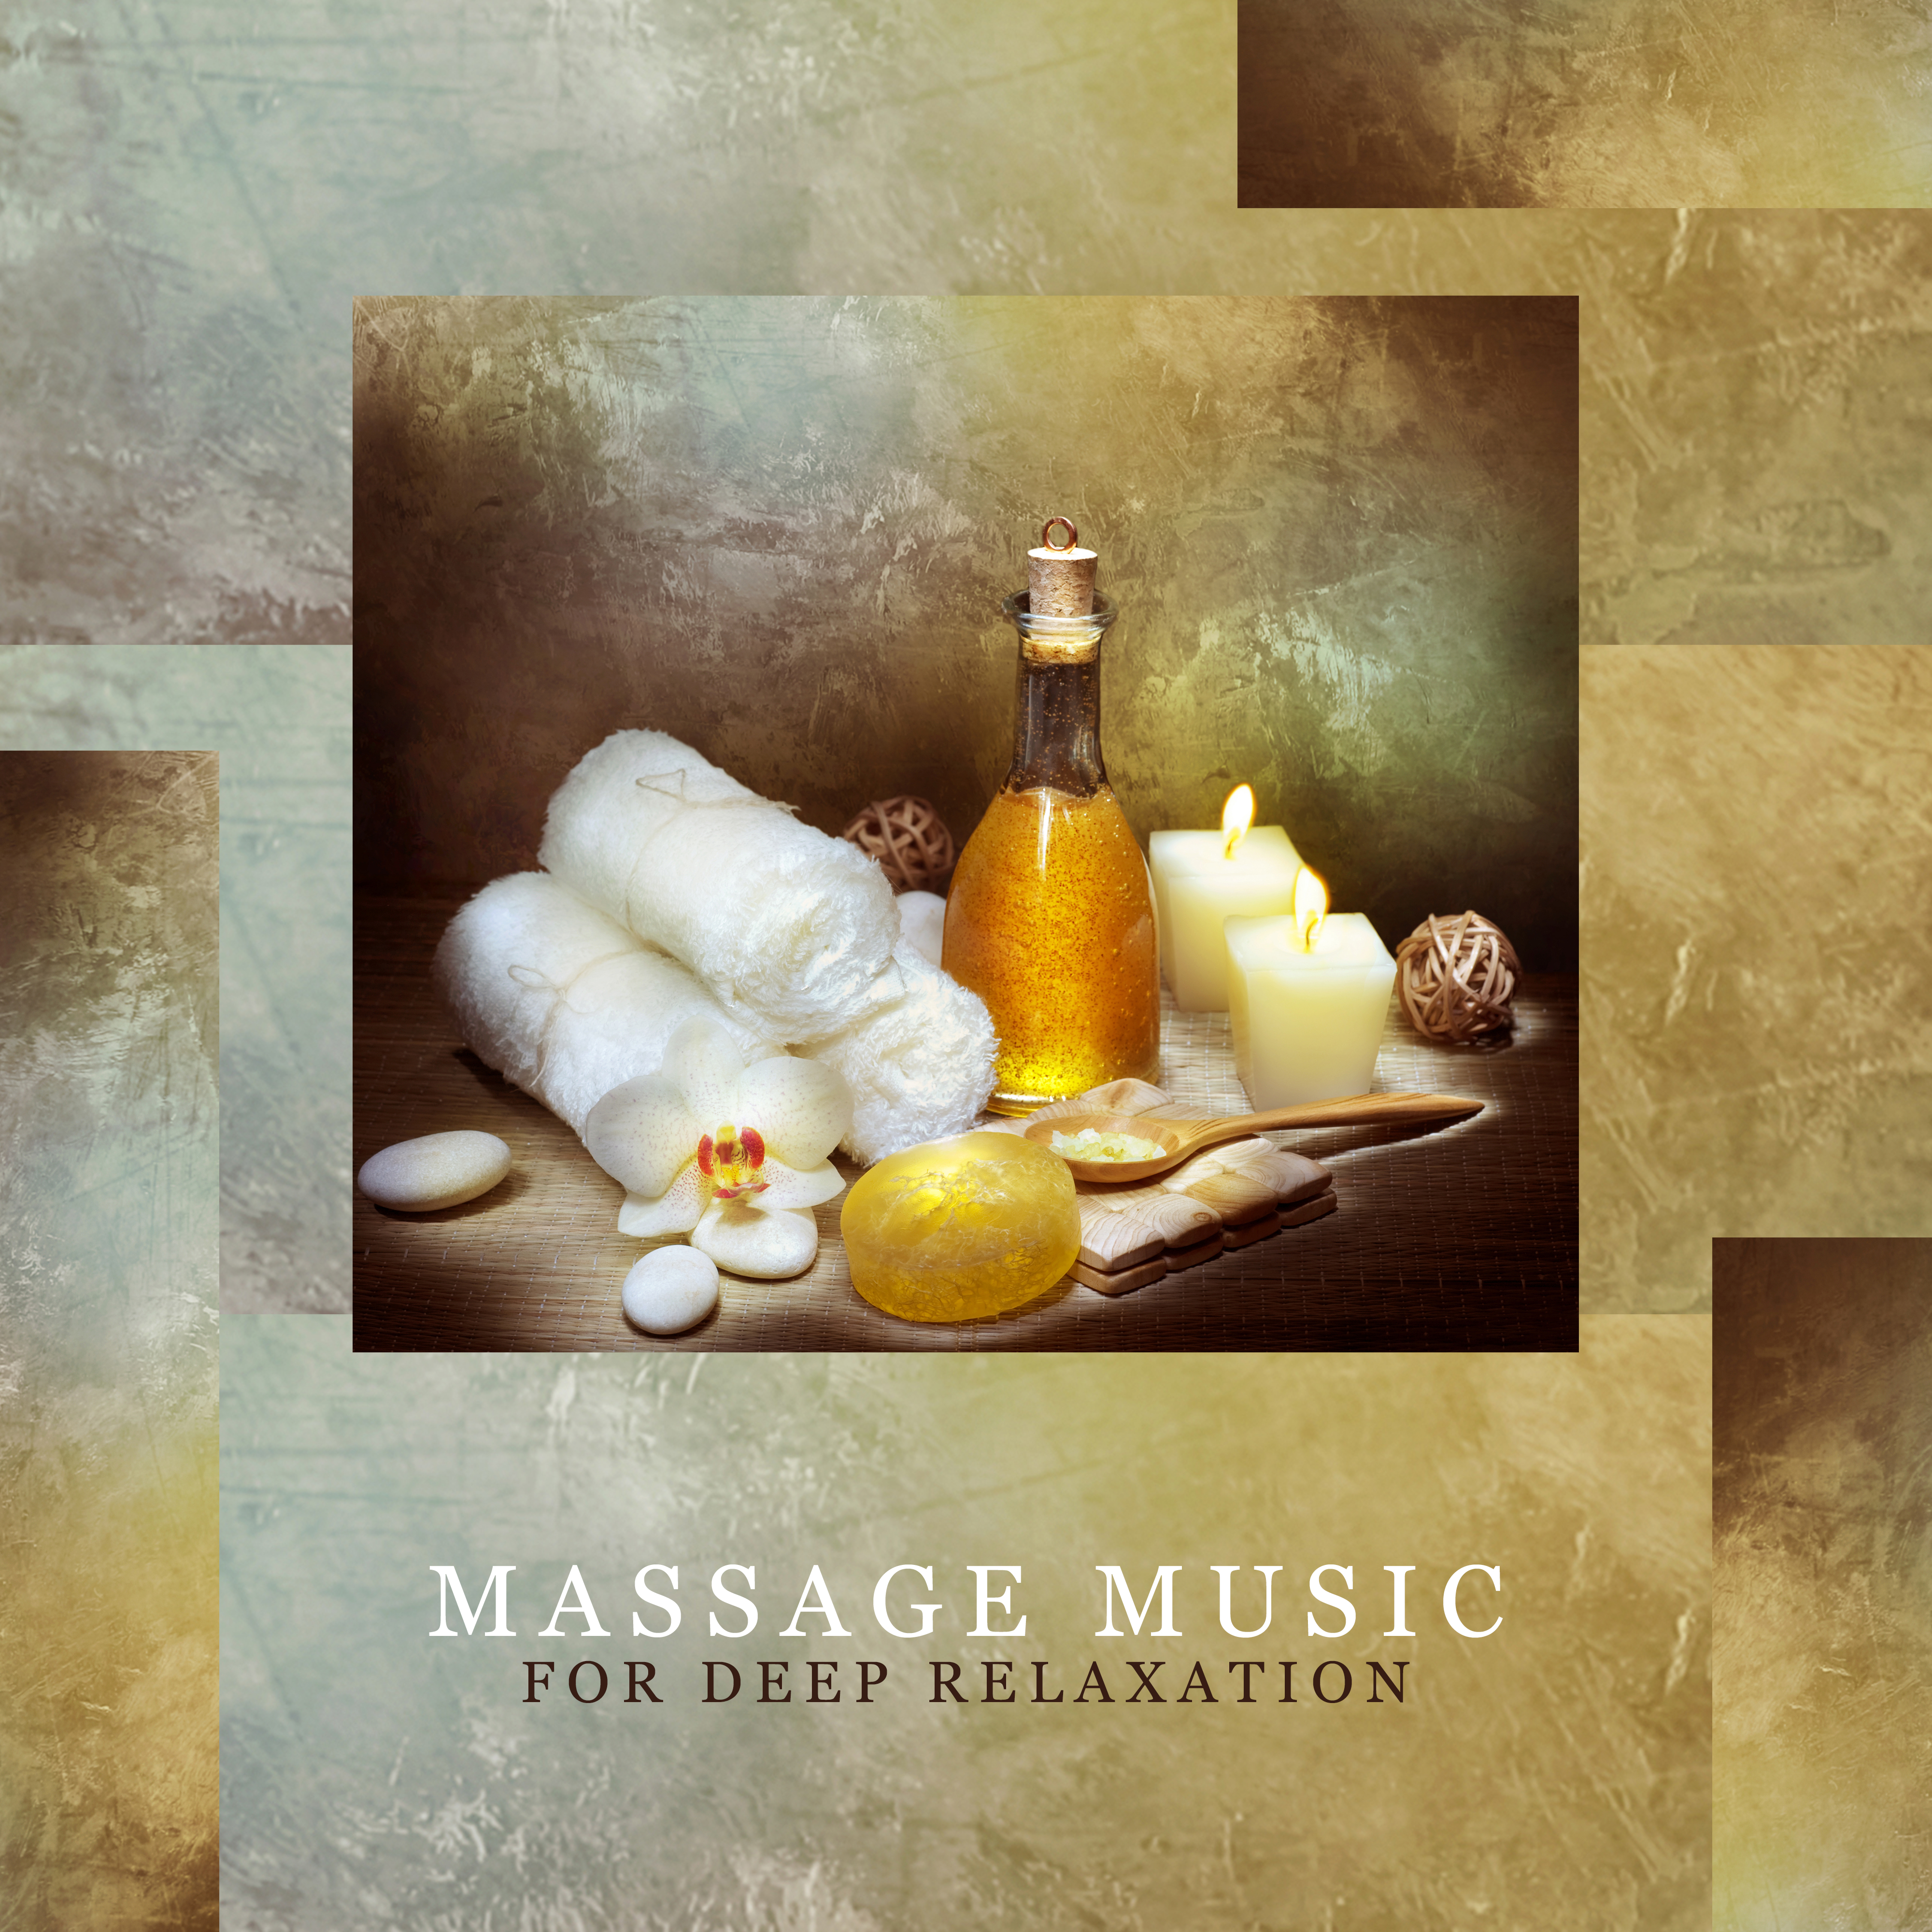 Massage Music for Deep Relaxation